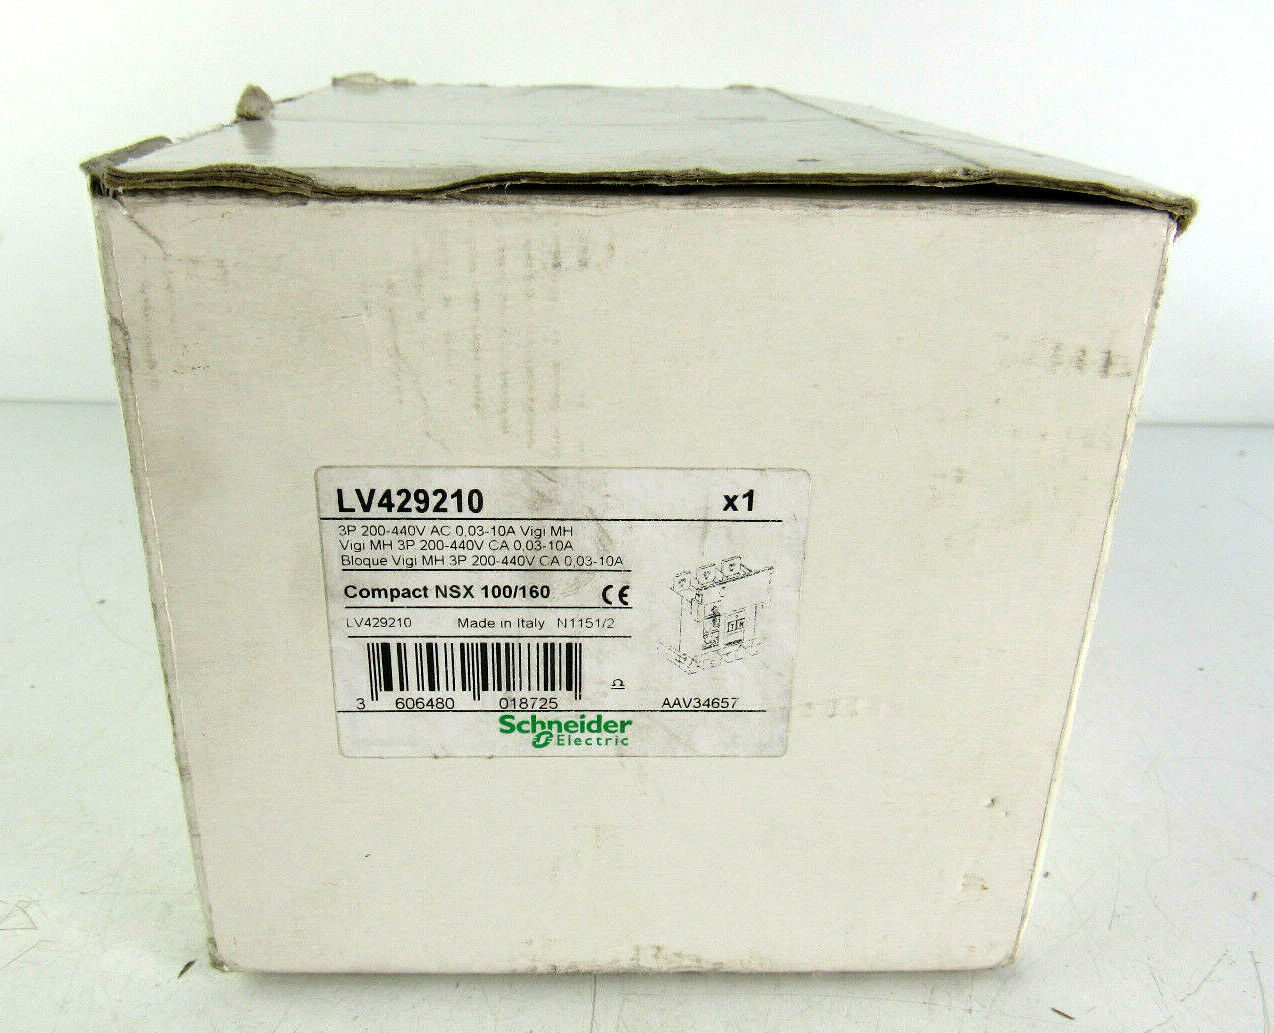 Schneider Earth-leakage add-on protection module, ComPact NSX 100/160,LV429210